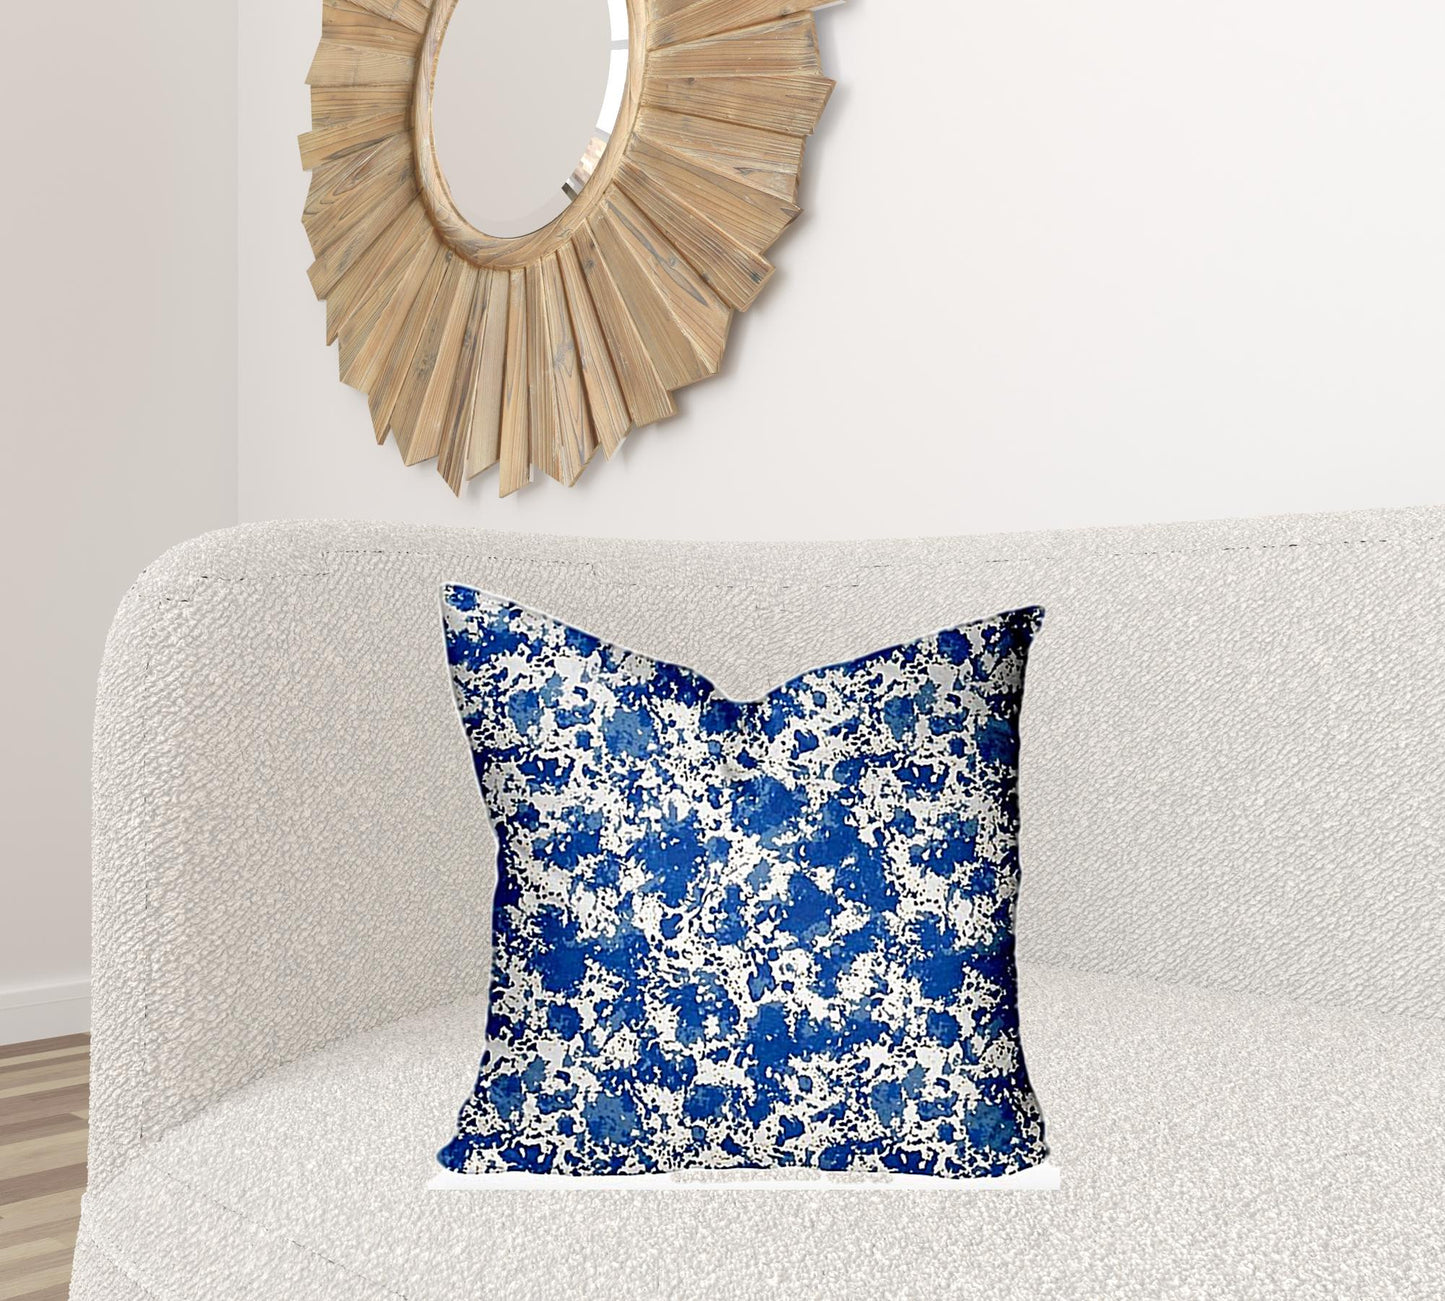 22" X 22" Blue And White Enveloped Coastal Throw Indoor Outdoor Pillow Cover